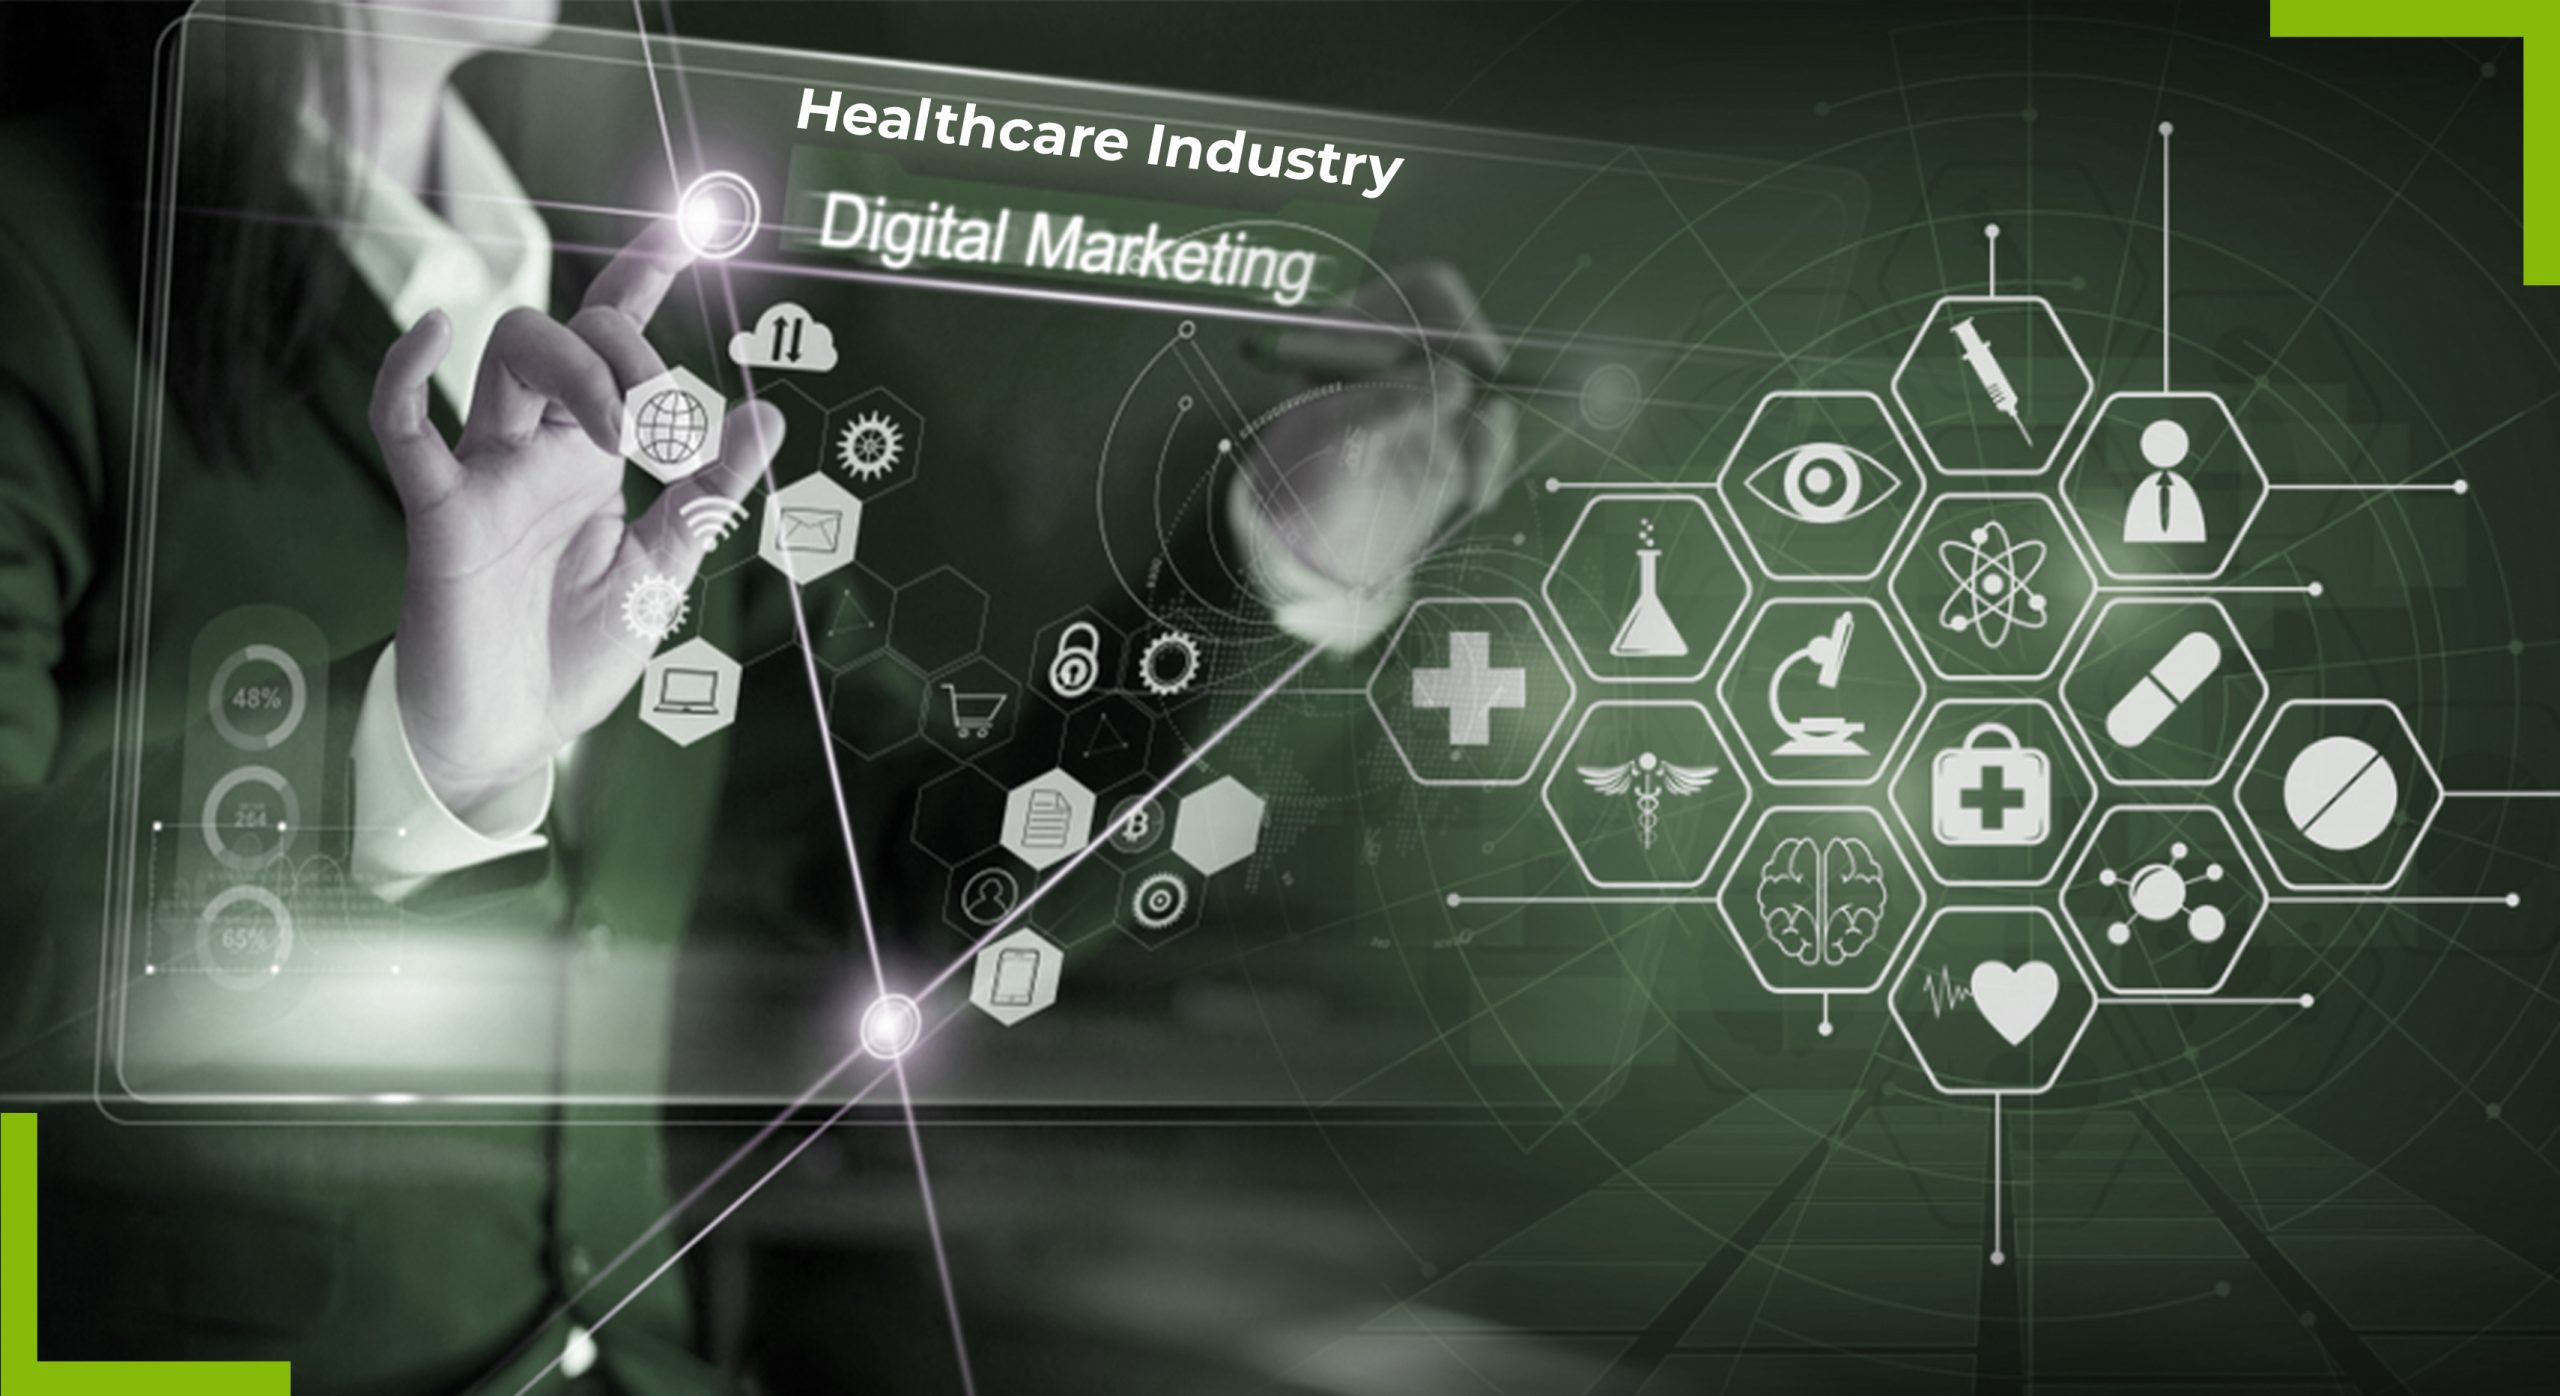 How Digital Marketing Can Help Healthcare Industry?